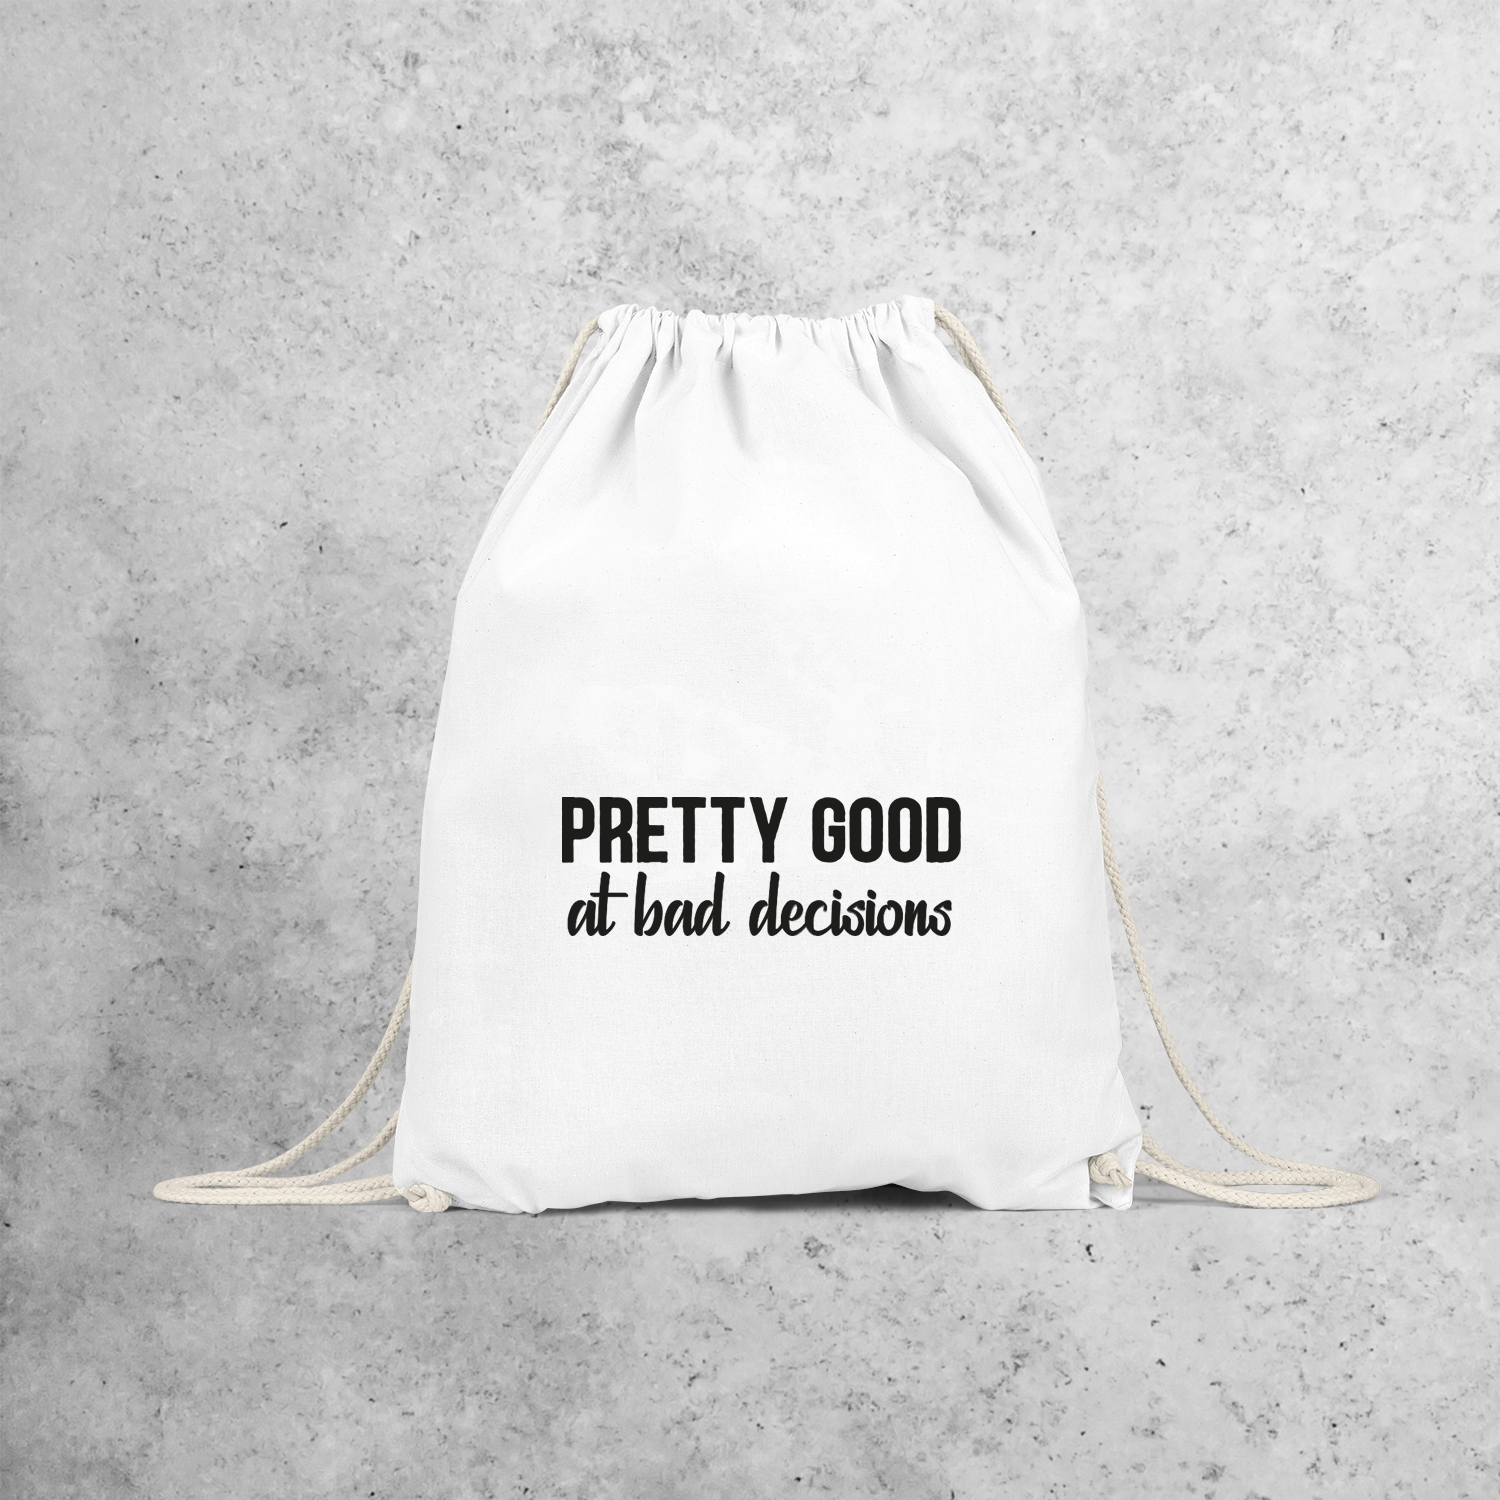 'Pretty good at bad decisions' backpack